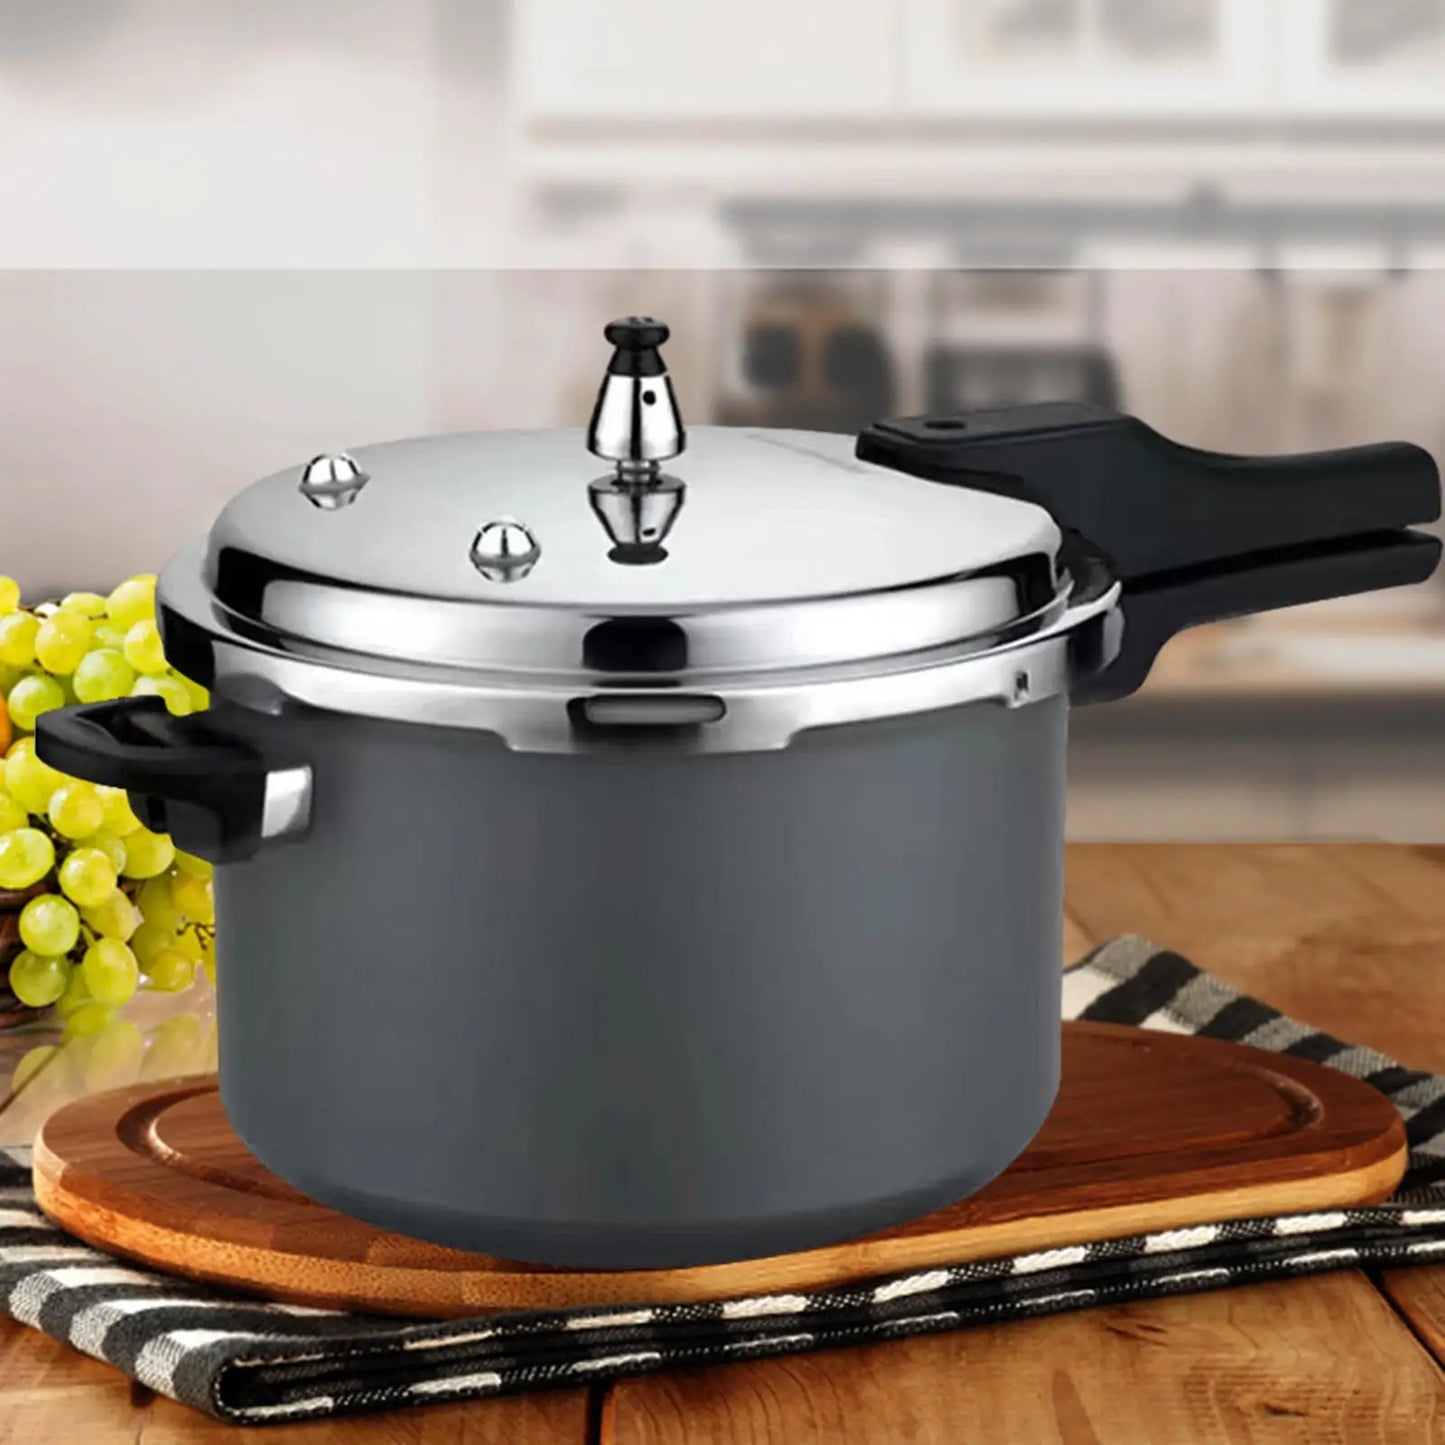 3L Pressure Cooker
Kitchen Cookware
Multifunction 80kpa Instant Cooking Pot
Explosion-Proof Pressure Cooker
For Cooking